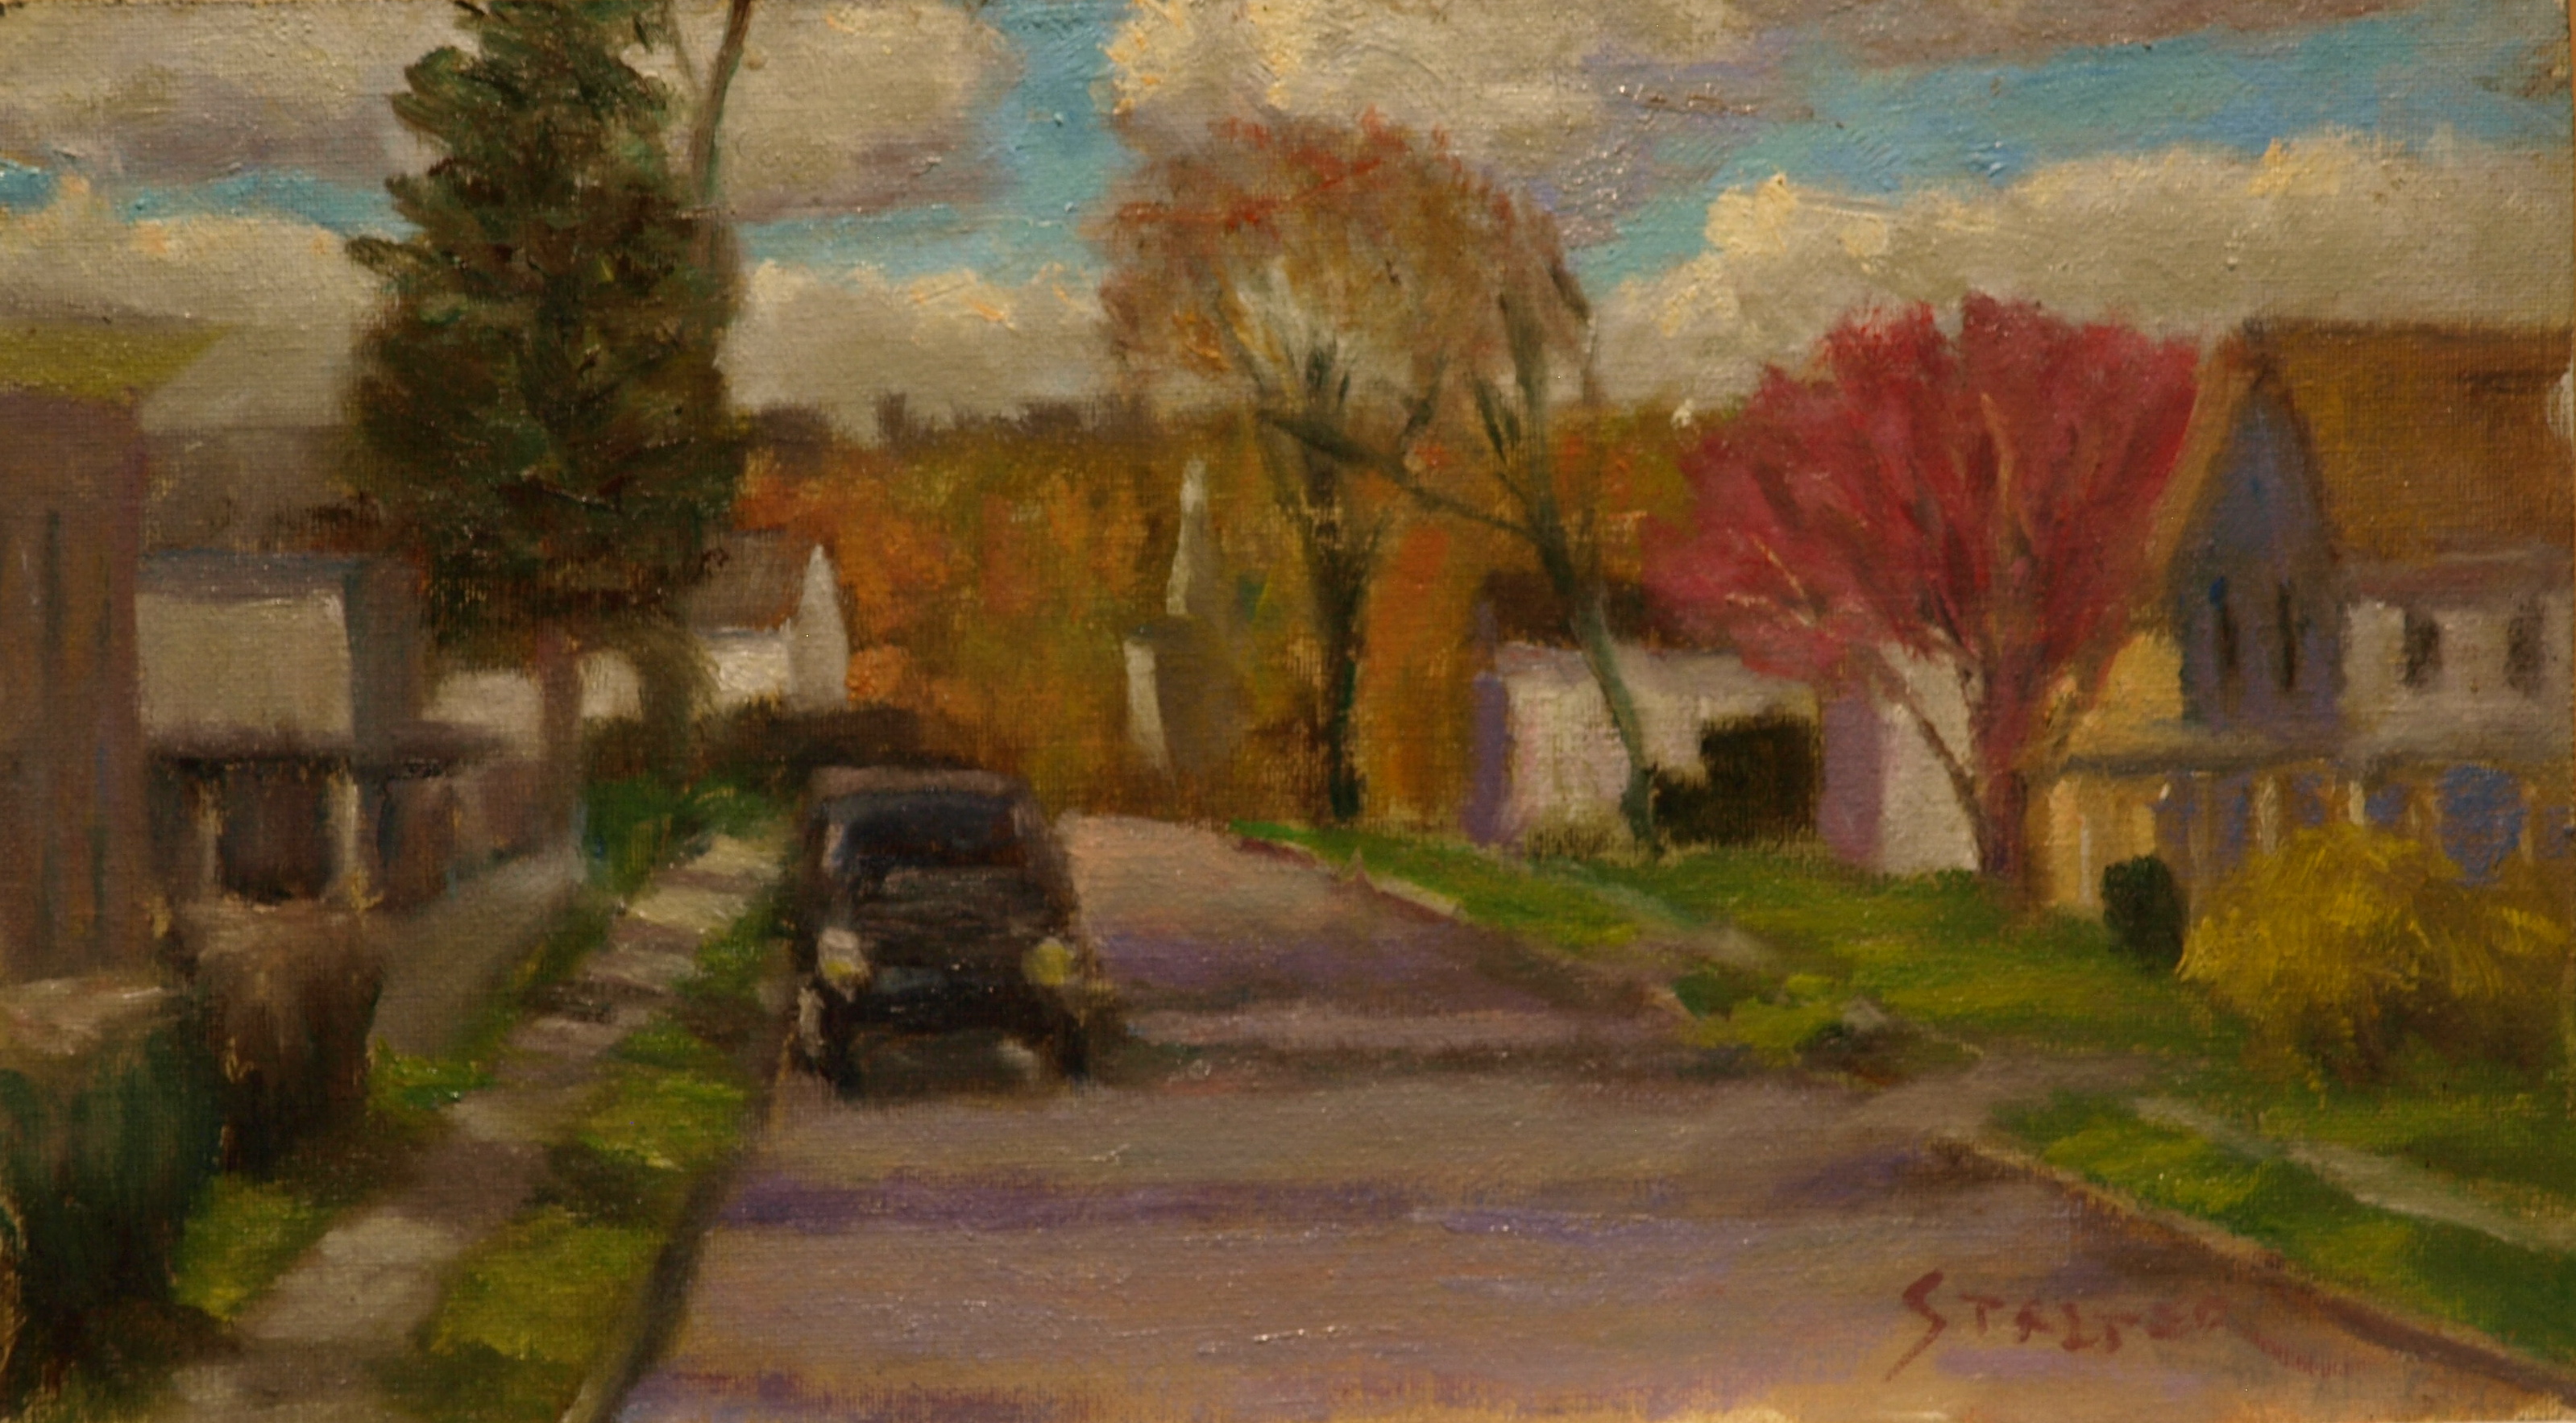 South Main, Oil on Canvas on Panel, 8 x 14 Inches, by Richard Stalter, $225